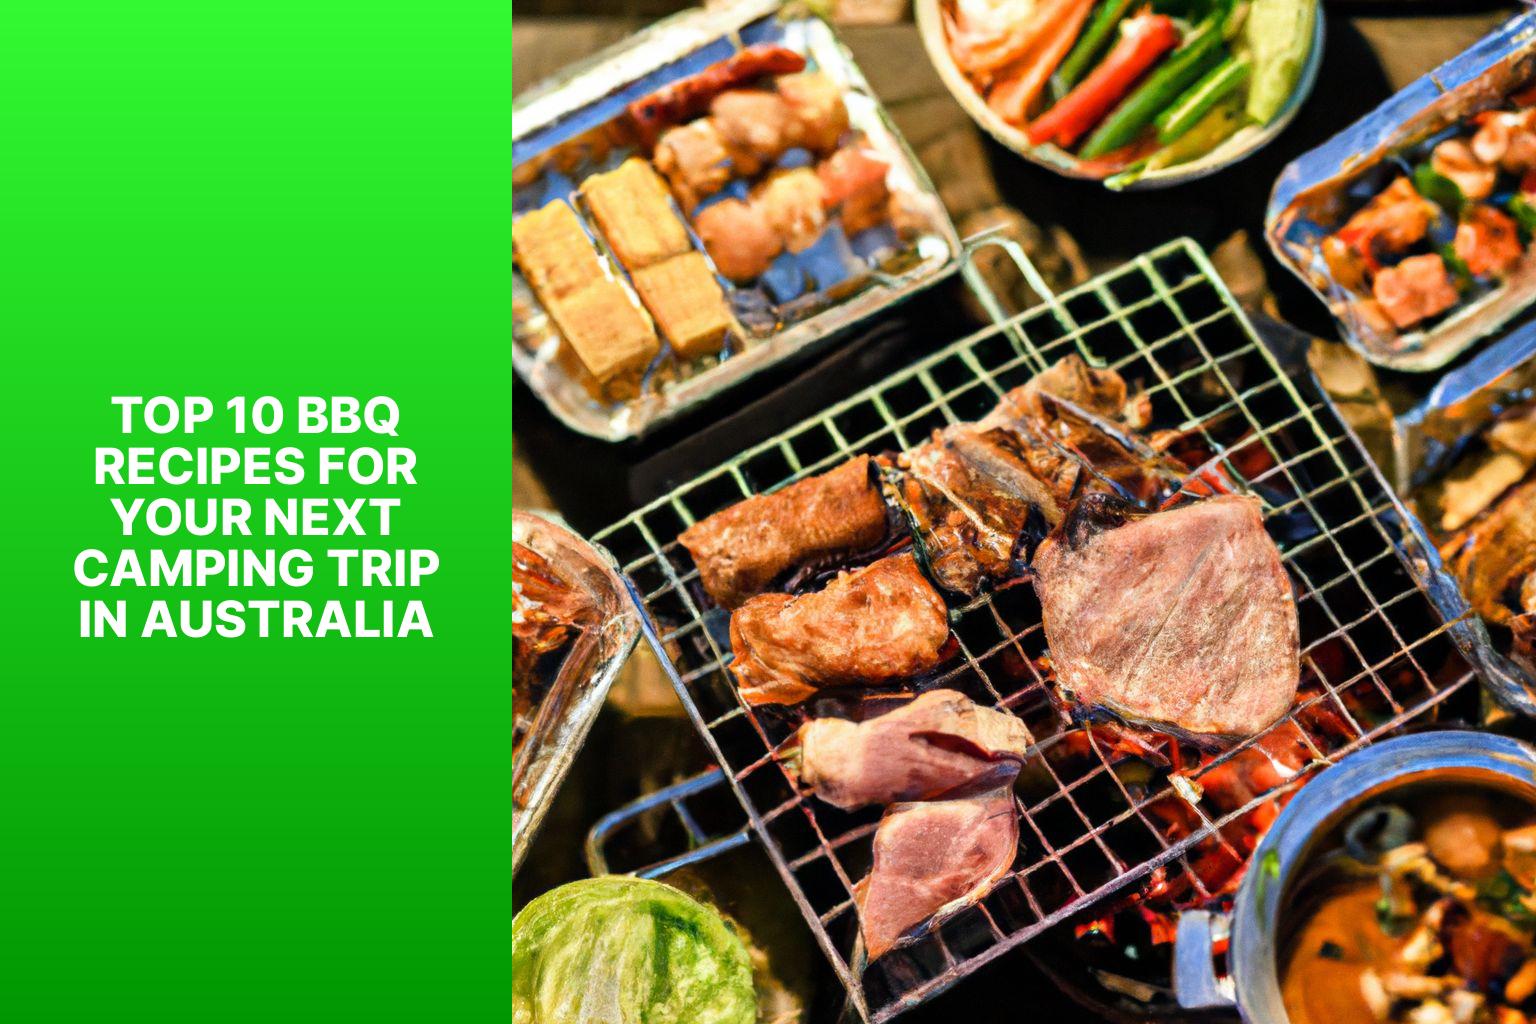 Top 10 BBQ Recipes for Your Next Camping Trip in Australia